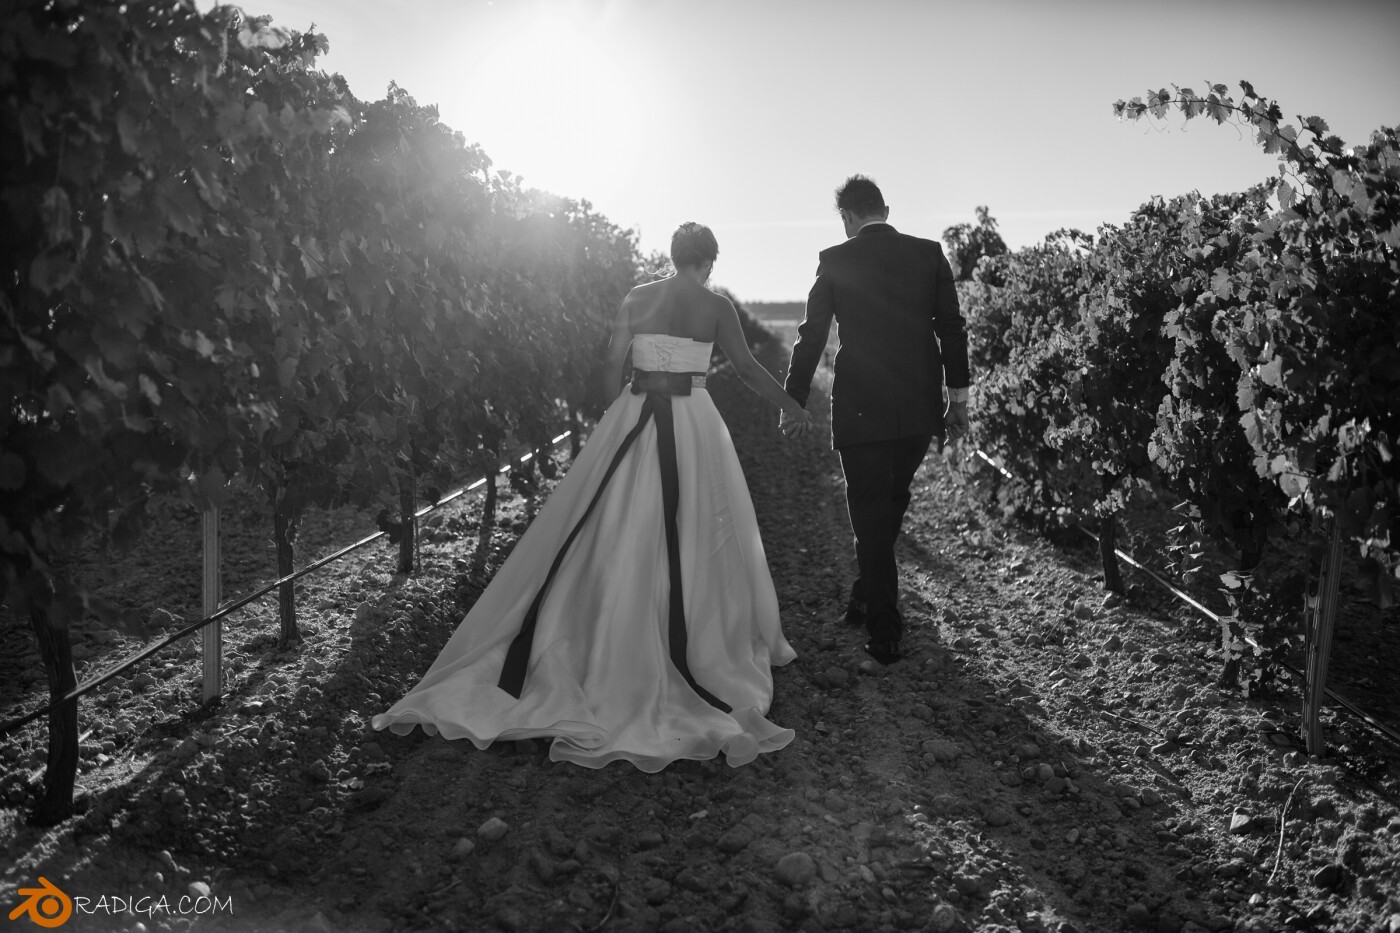 Agustín and Natalia celebrated their wedding day at "Ribera del Duero" an important wine producing area of Castilla y Leon in northern Spain. It was the end of summer and the vineyards were amazing. We were very lucky with the light, when the sun began to set light seeped between strains. We take the opportunity to play with lights and shadows to capture the atmosphere of that special day. it was perfect!!